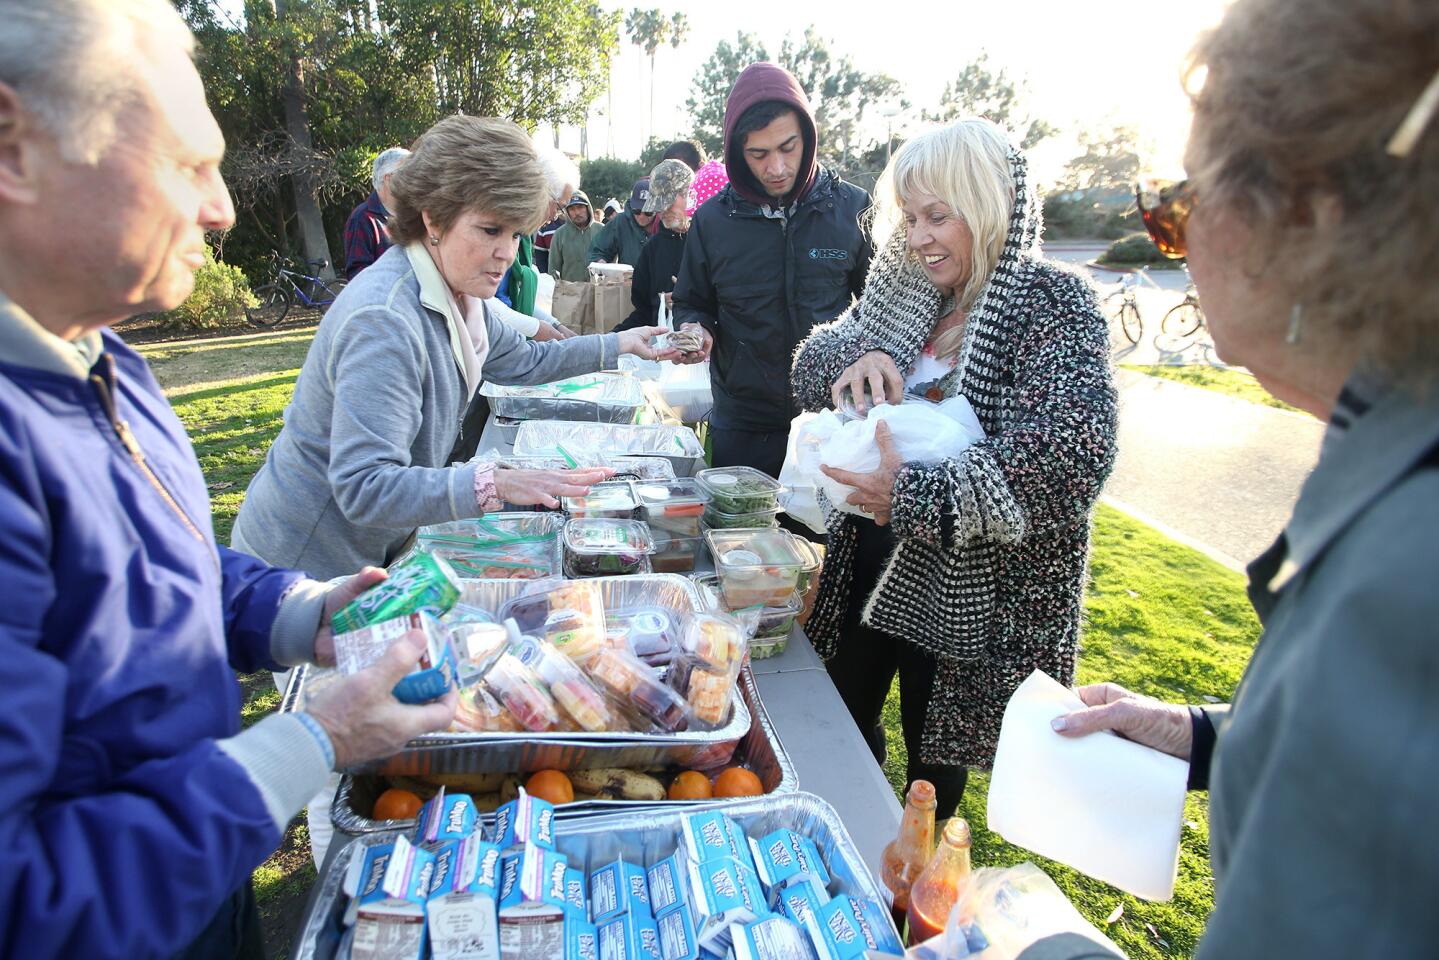 Volunteers, from left, Glenn Wood, Jeannie Karcher and Moira Obermeyer share a laugh with a guest who stands in line at the Welcome Inn, an interfaith meal service at Doheny State Beach on recent evening.